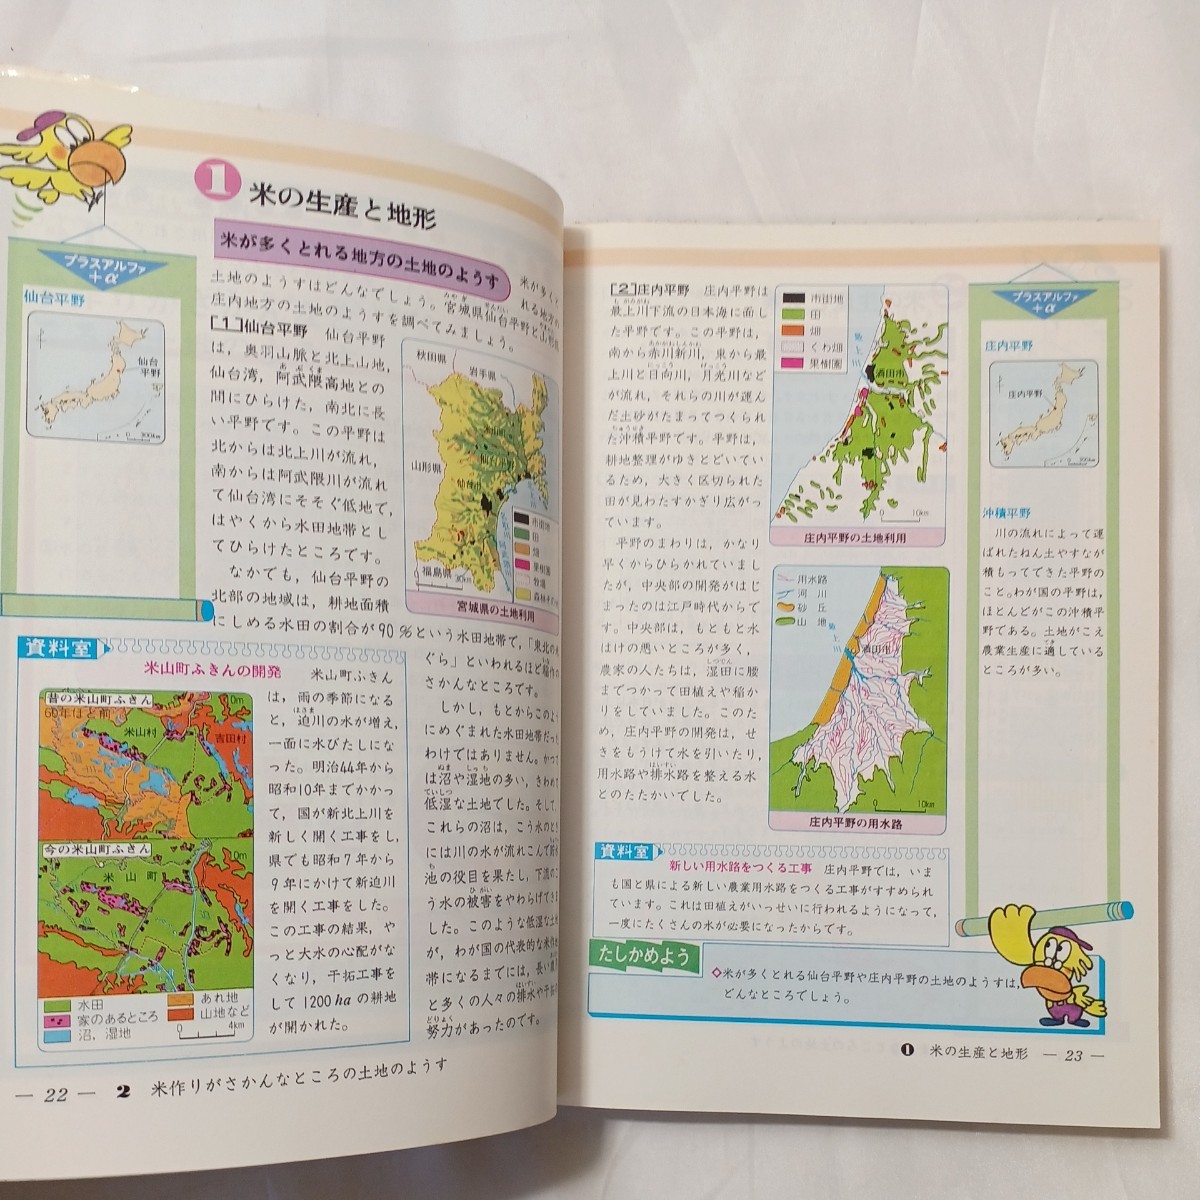 zaa-504! reference book grip society elementary school 5 year writing . publish editing part compilation writing . publish (1989/03 sale )